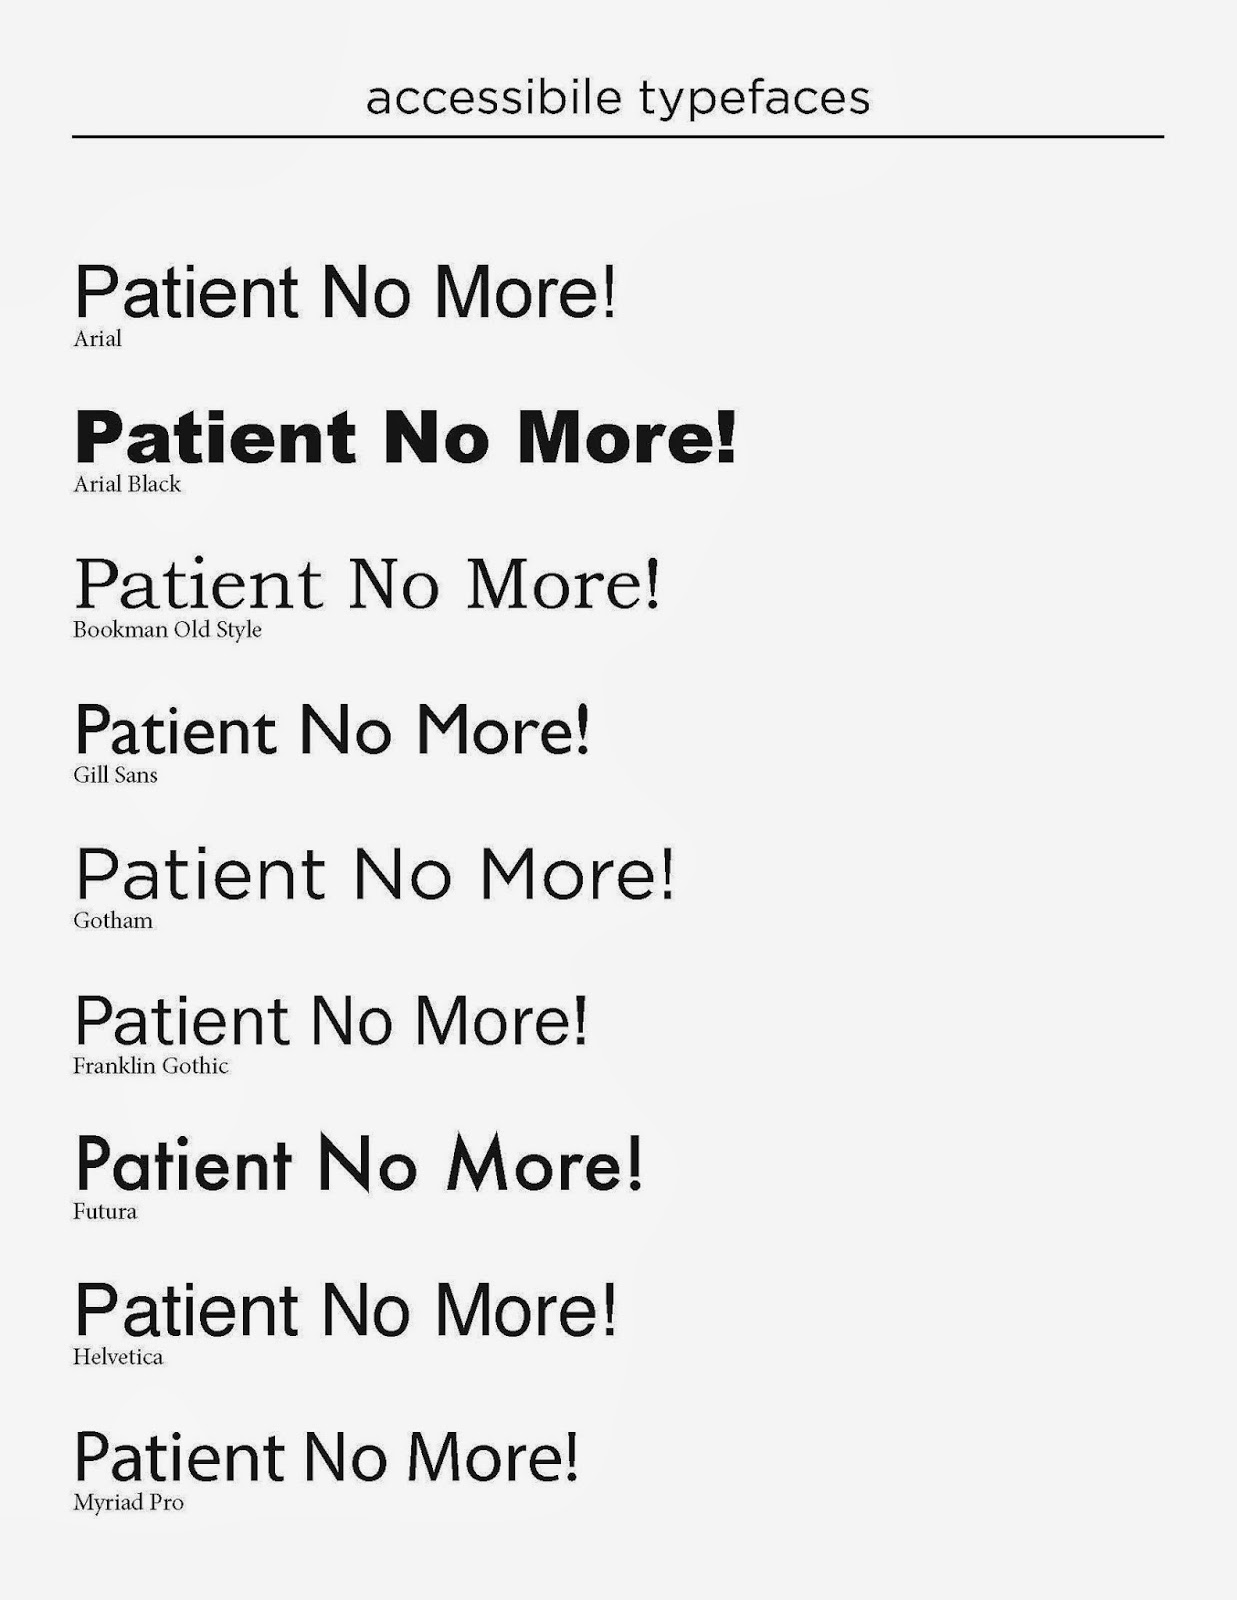 the words "Patient No More!" written in a variety of fonts